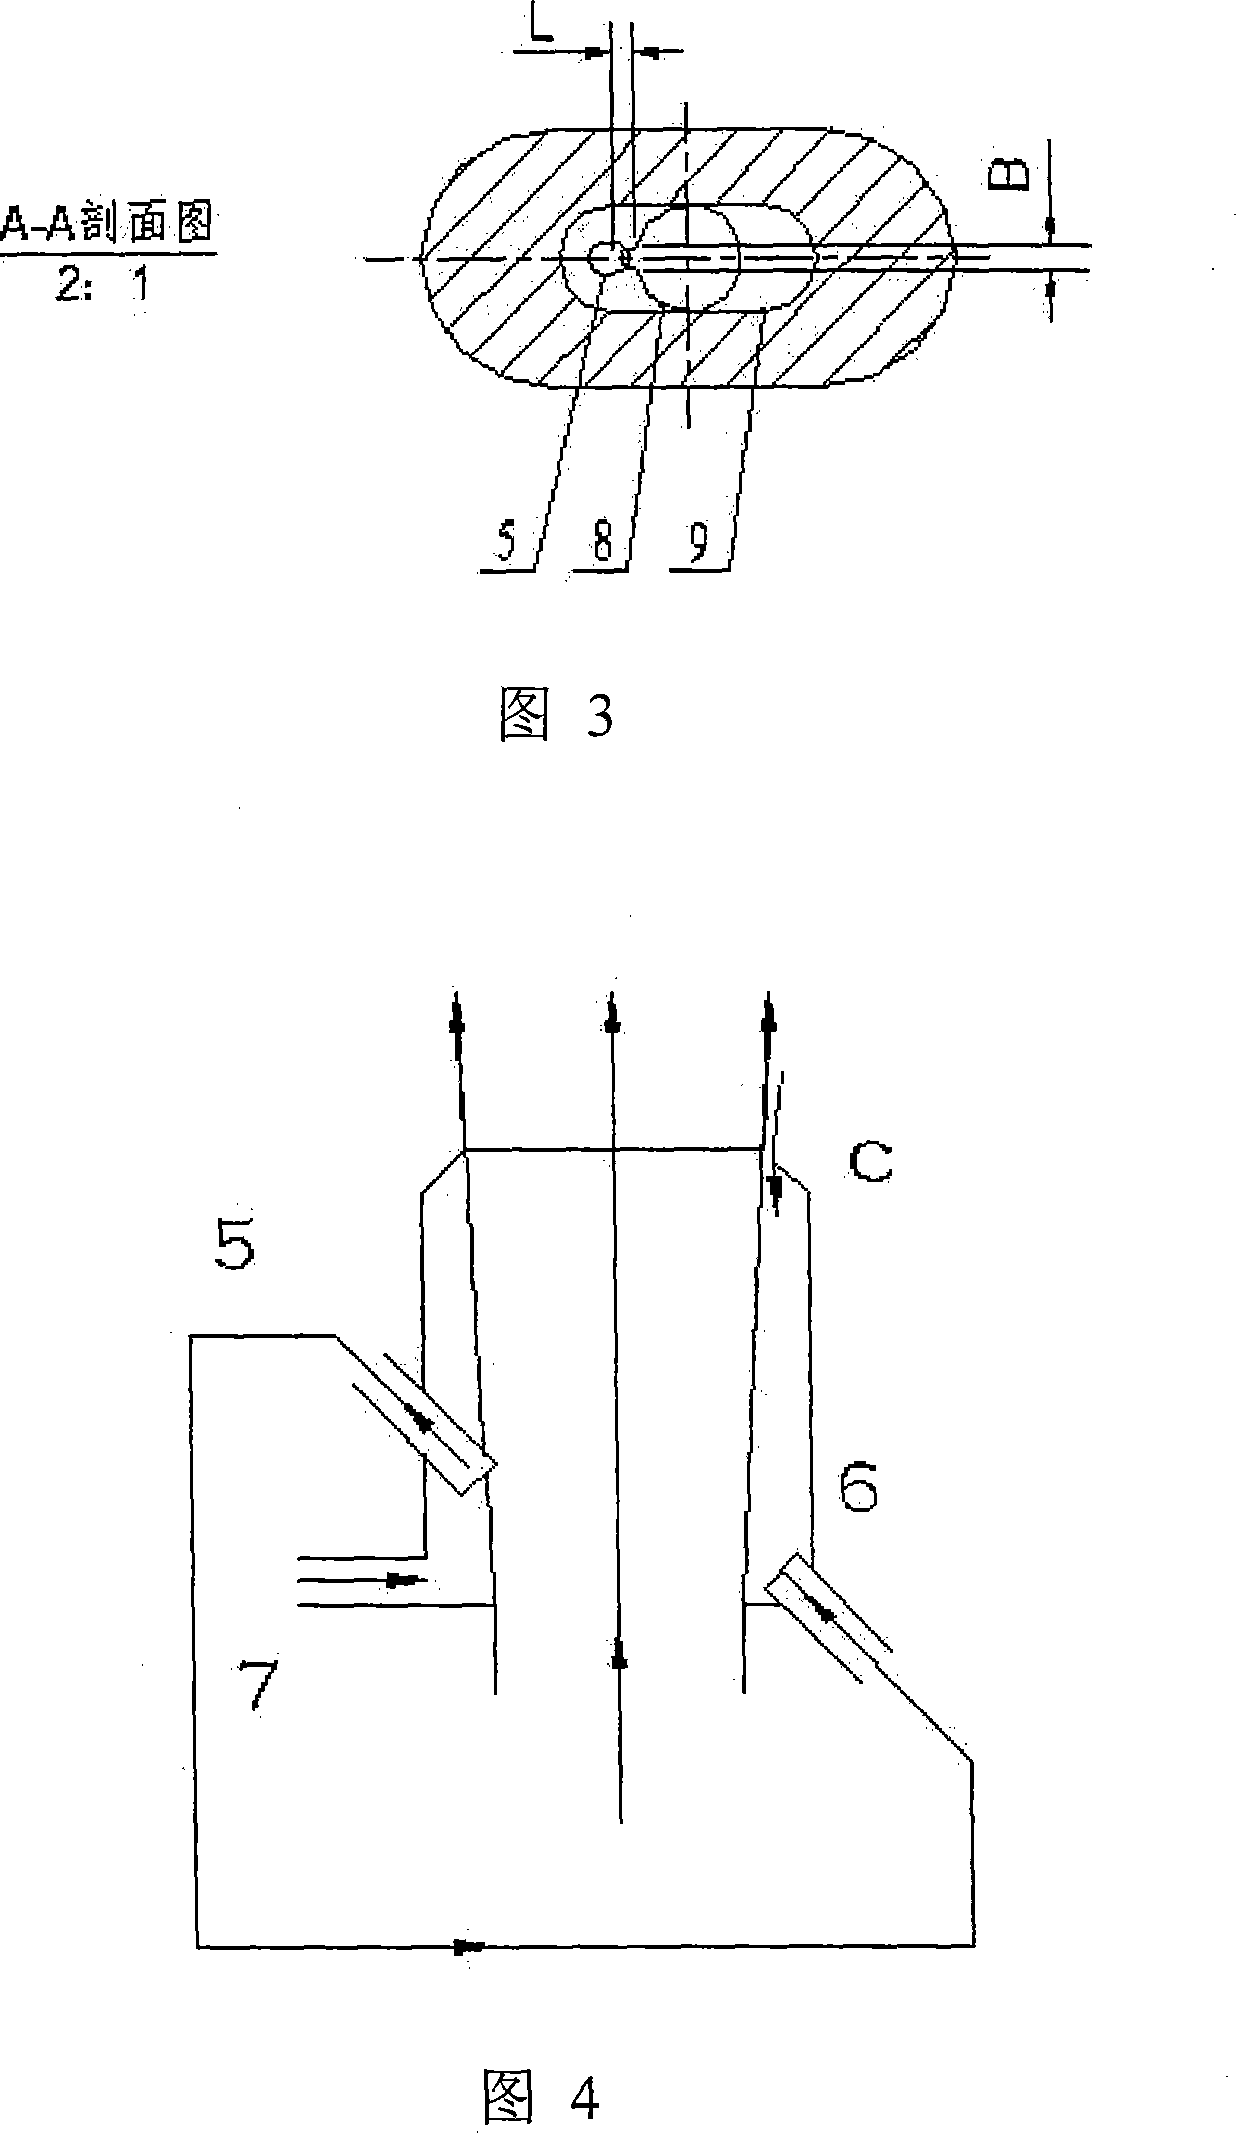 Special-shaped nozzle fluidics sprinkler